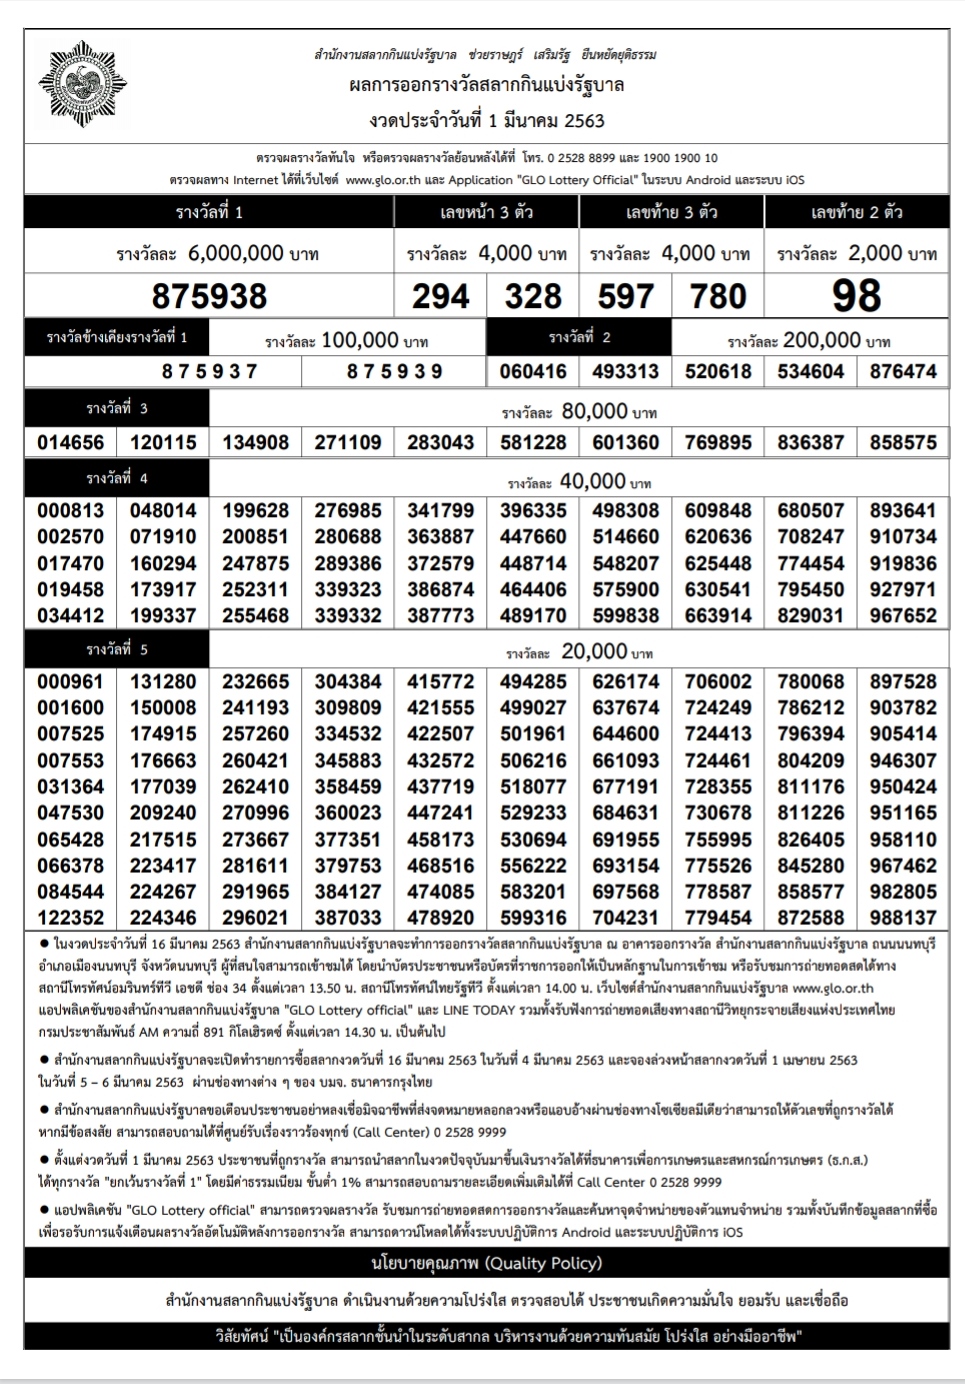 Thai Lotto Result April 16 2019, Buy Now, Hot Sale, 51% OFF,  